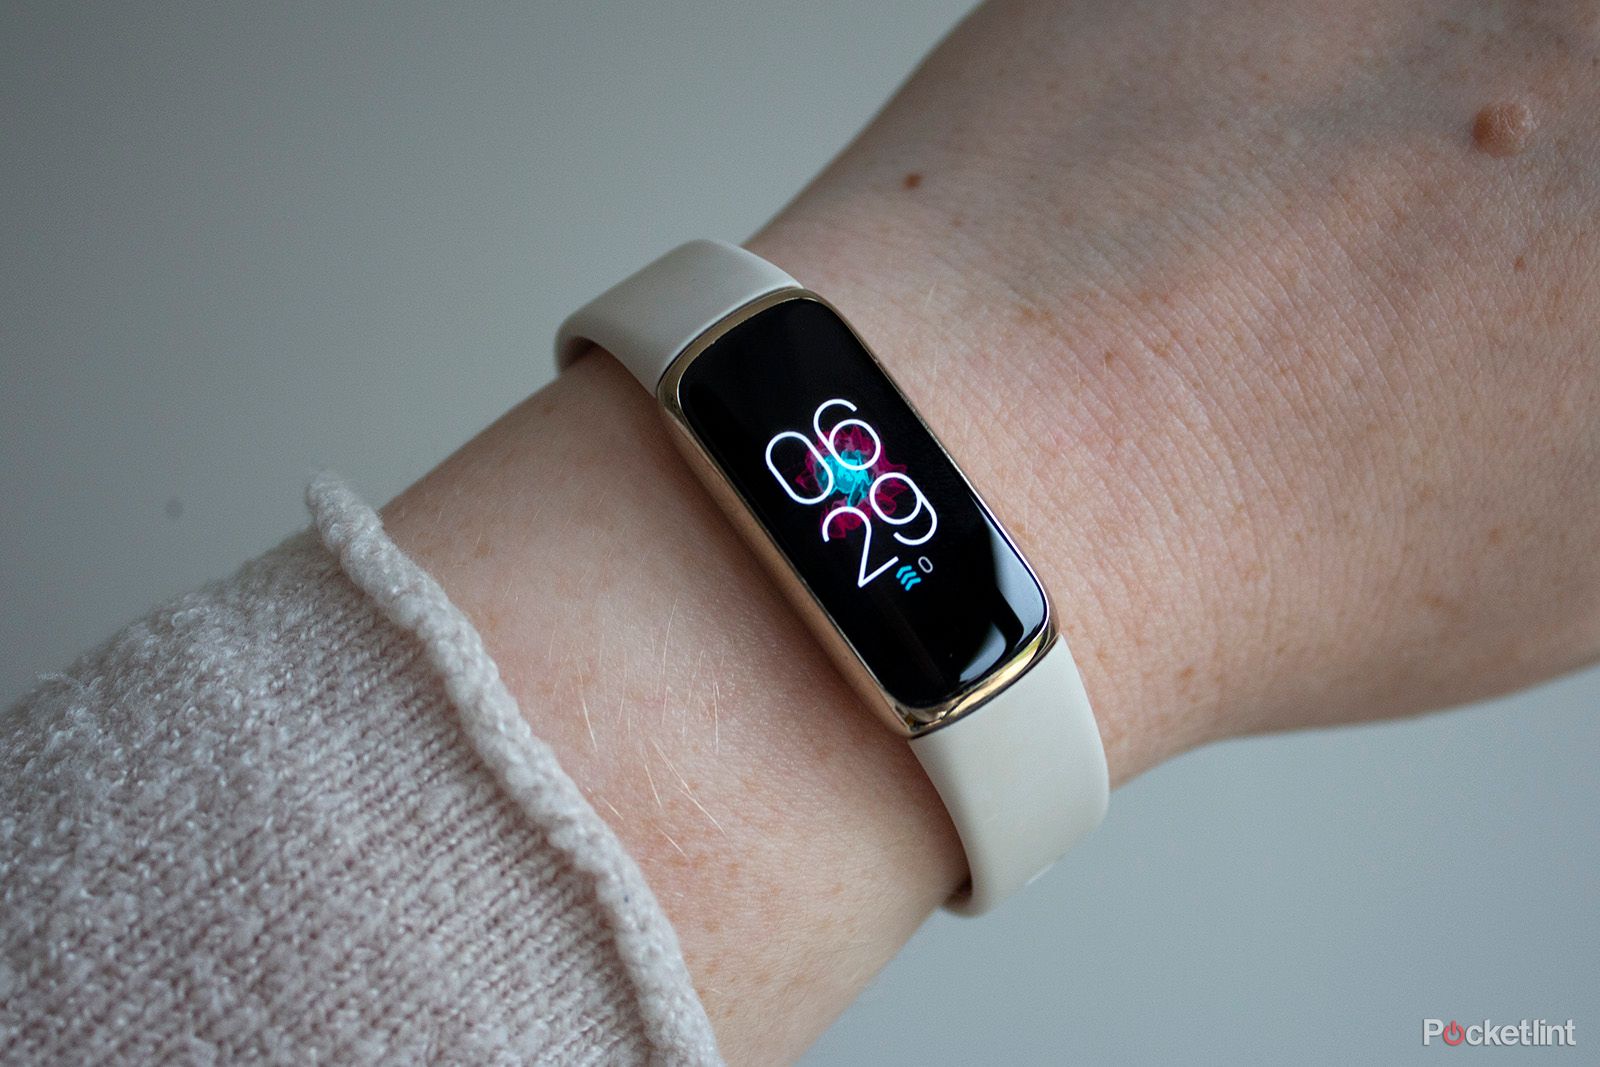 How to reset your Fitbit: Tips on resetting or restarting your Fitbit